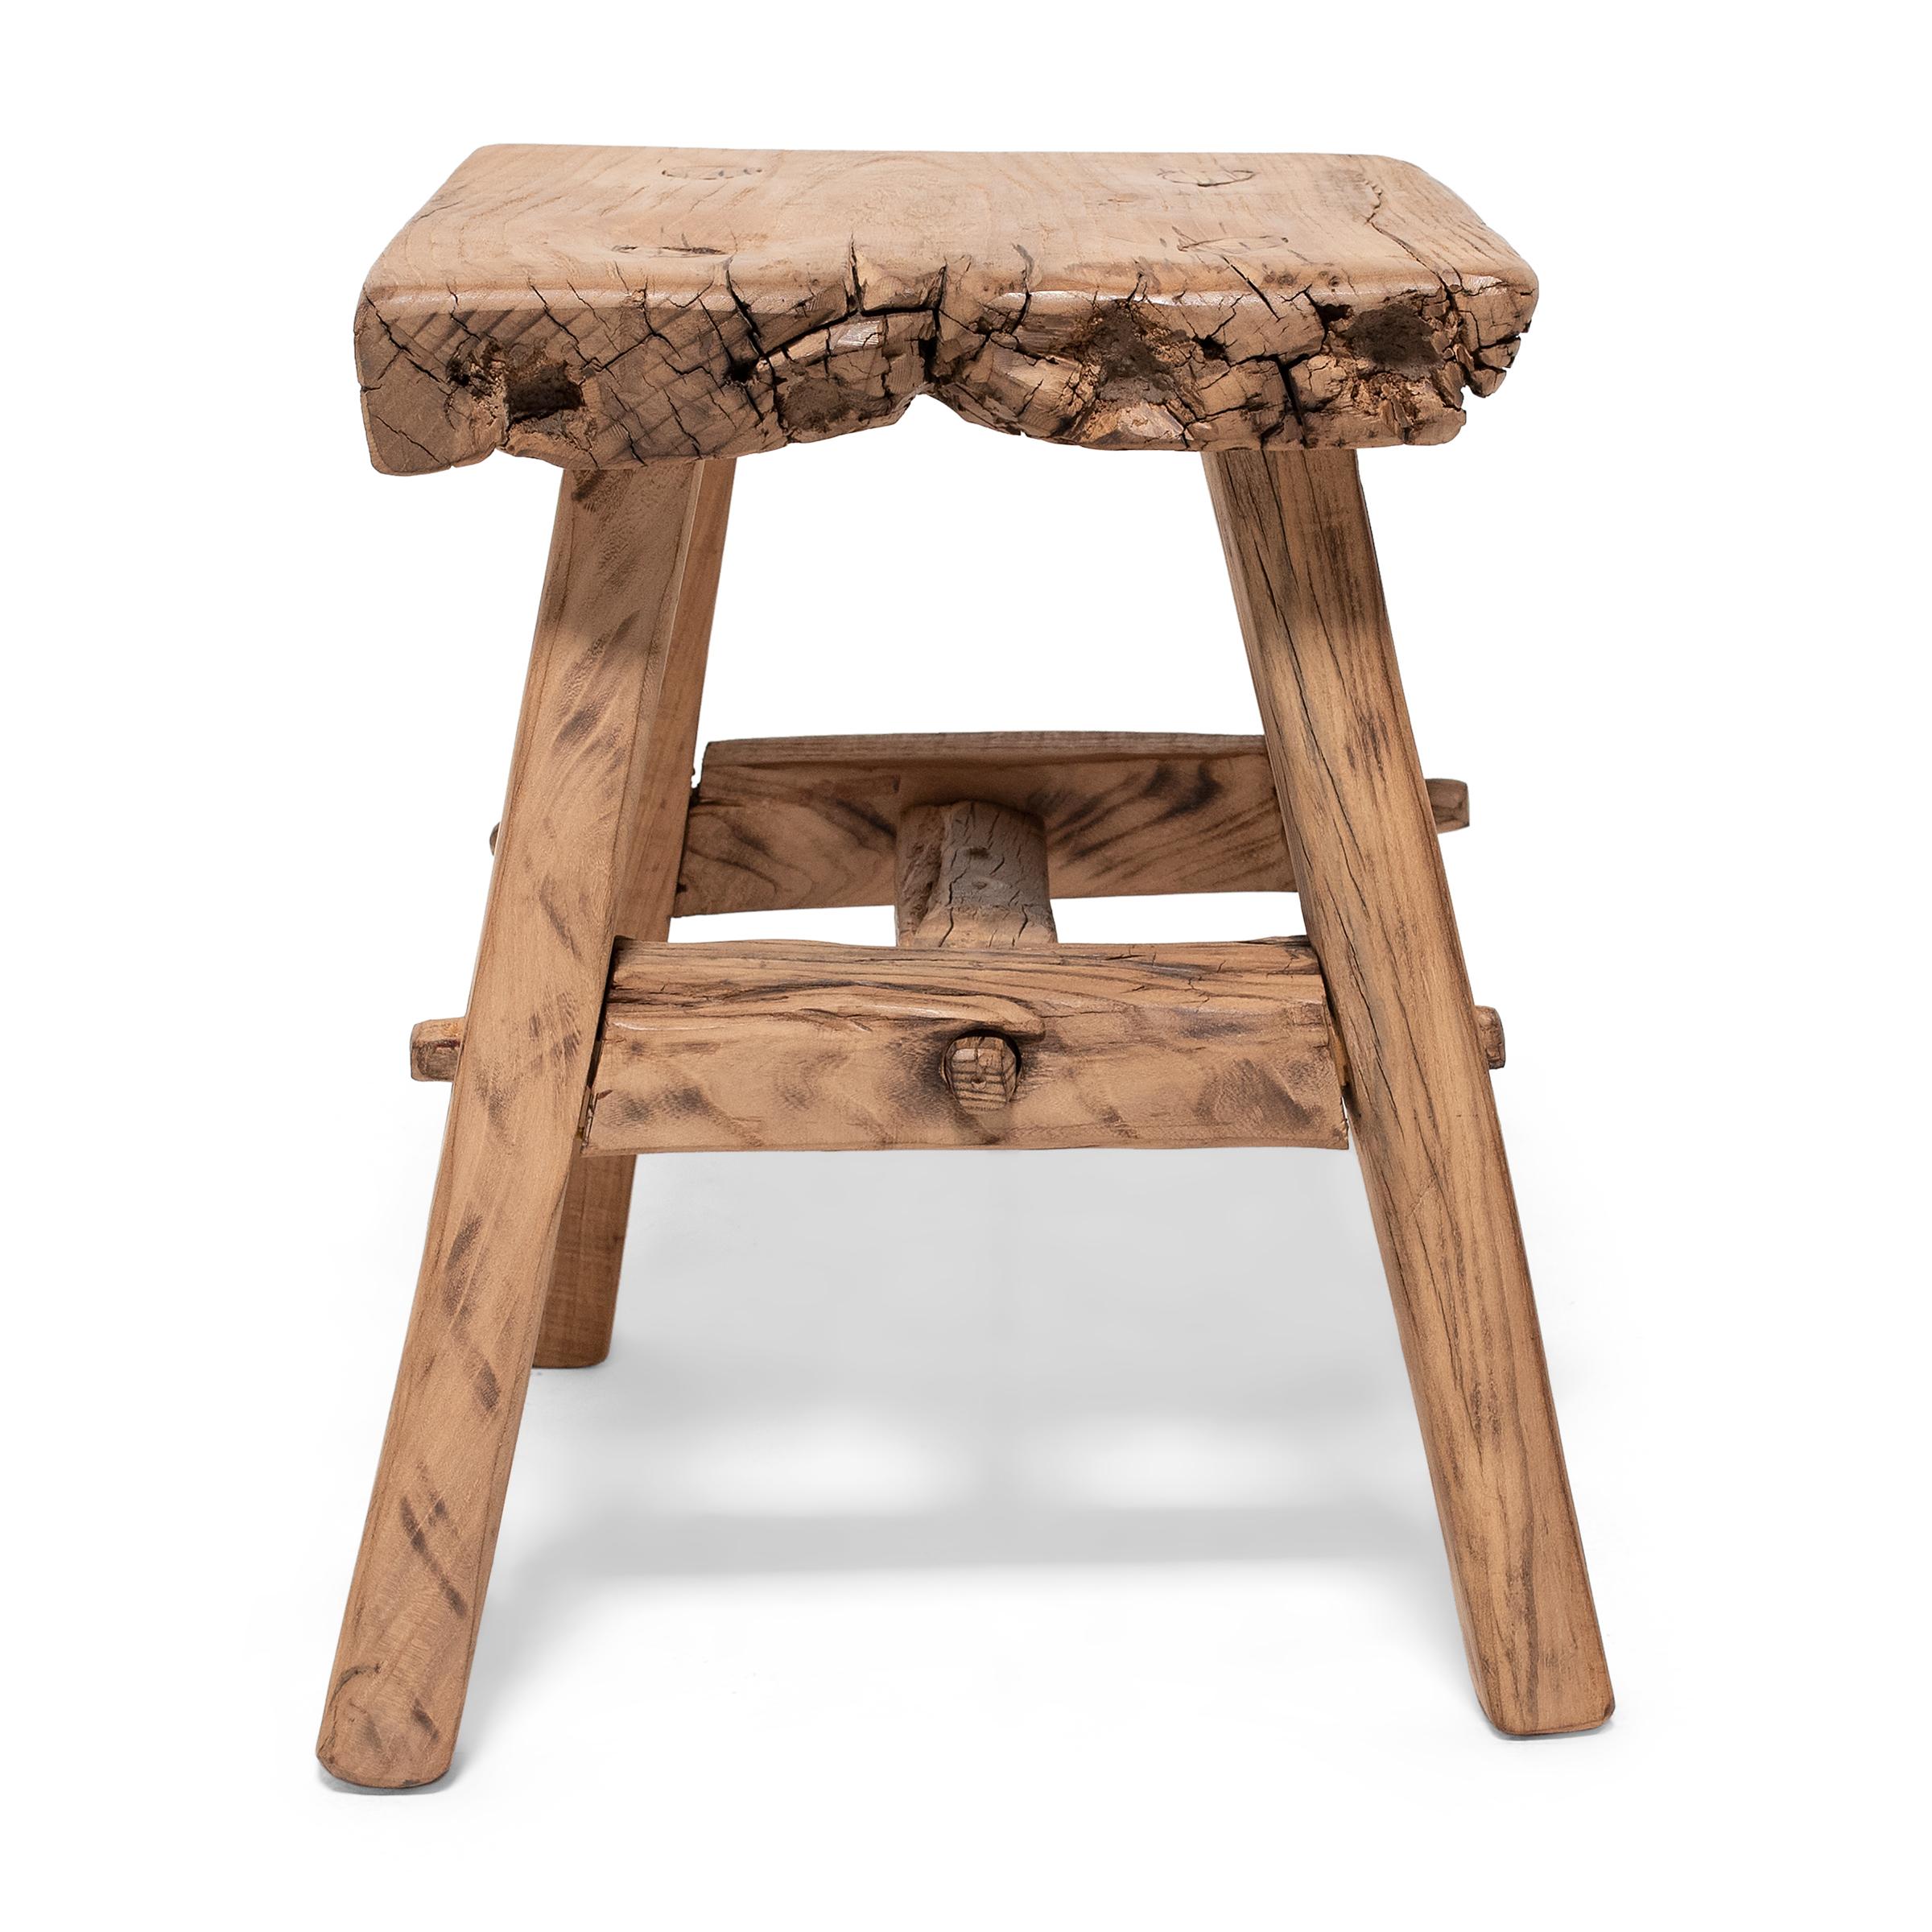 Crafted of wood reclaimed from 18th-century Chinese buildings, this square four-leg stool is the epitome of farmhouse modern. Embracing the notion of “wabi-sabi,” the little stool charms with its irregular edges and array of knots, splits, and nail